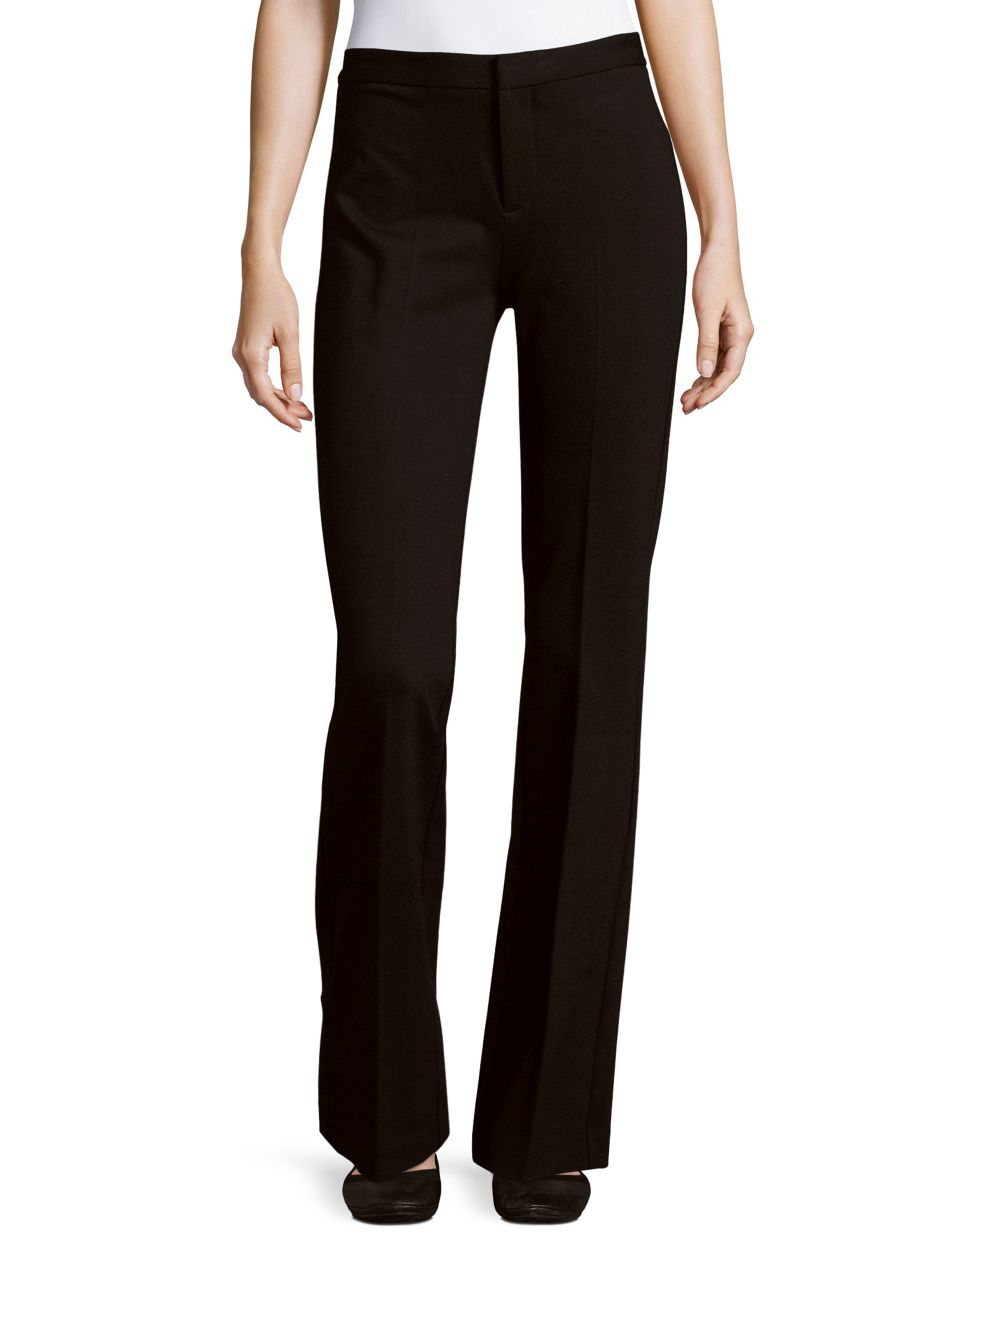 Saks fifth avenue black Flat-front Solid Pants in Black | Lyst